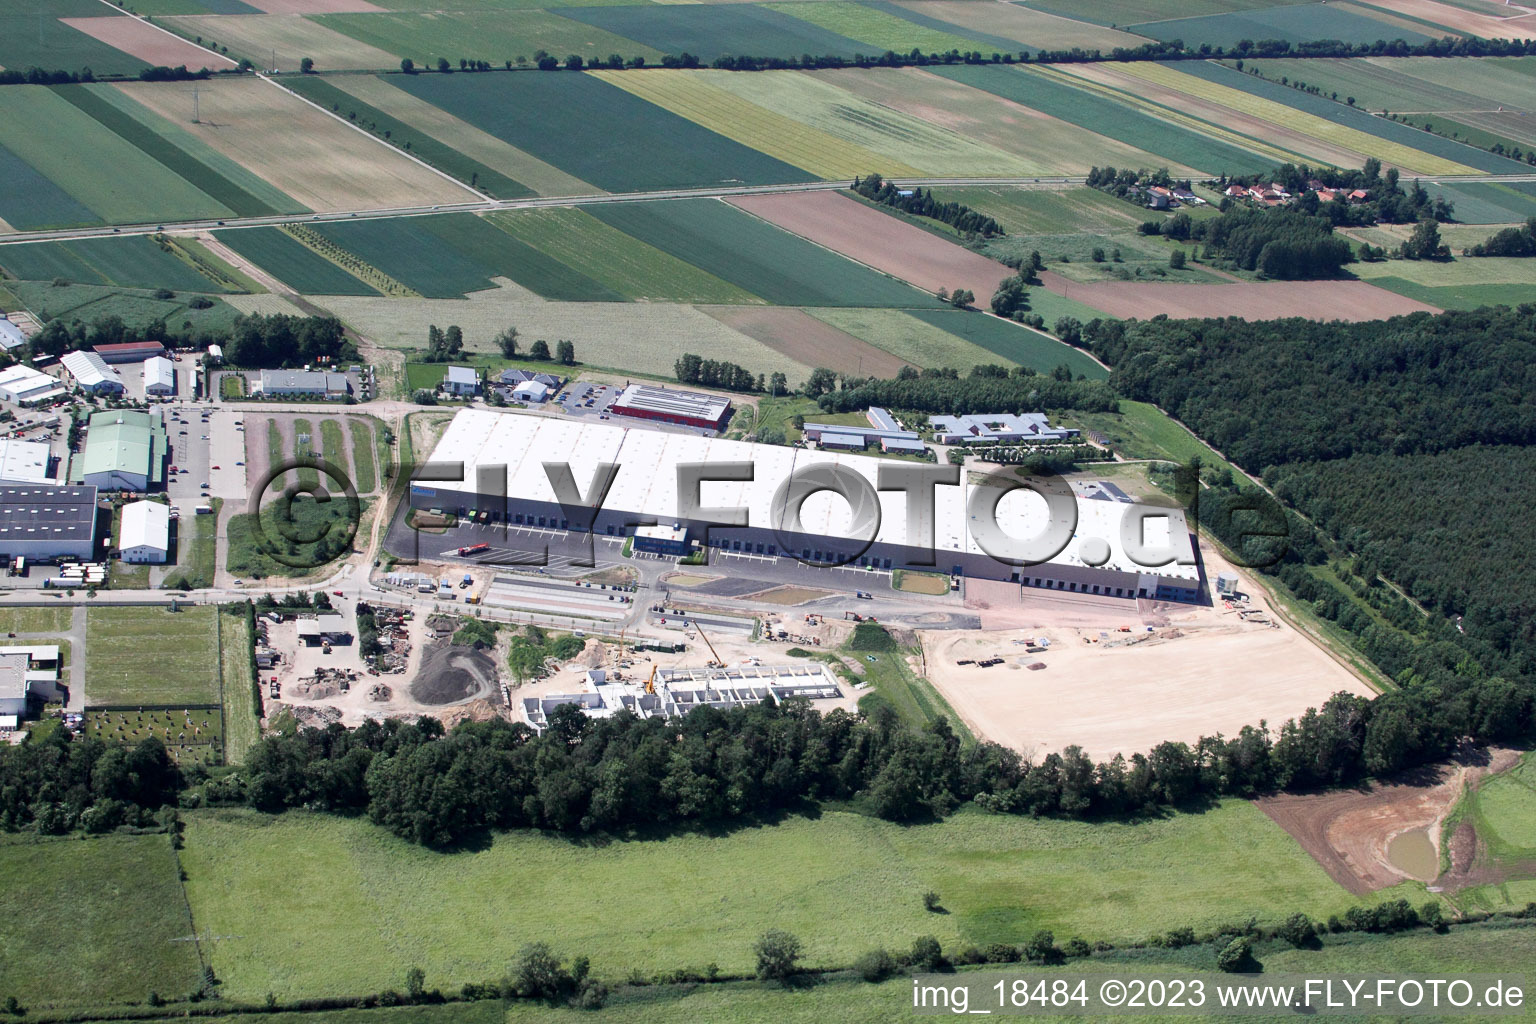 Drone recording of Coincidence logistics center in the district Minderslachen in Kandel in the state Rhineland-Palatinate, Germany